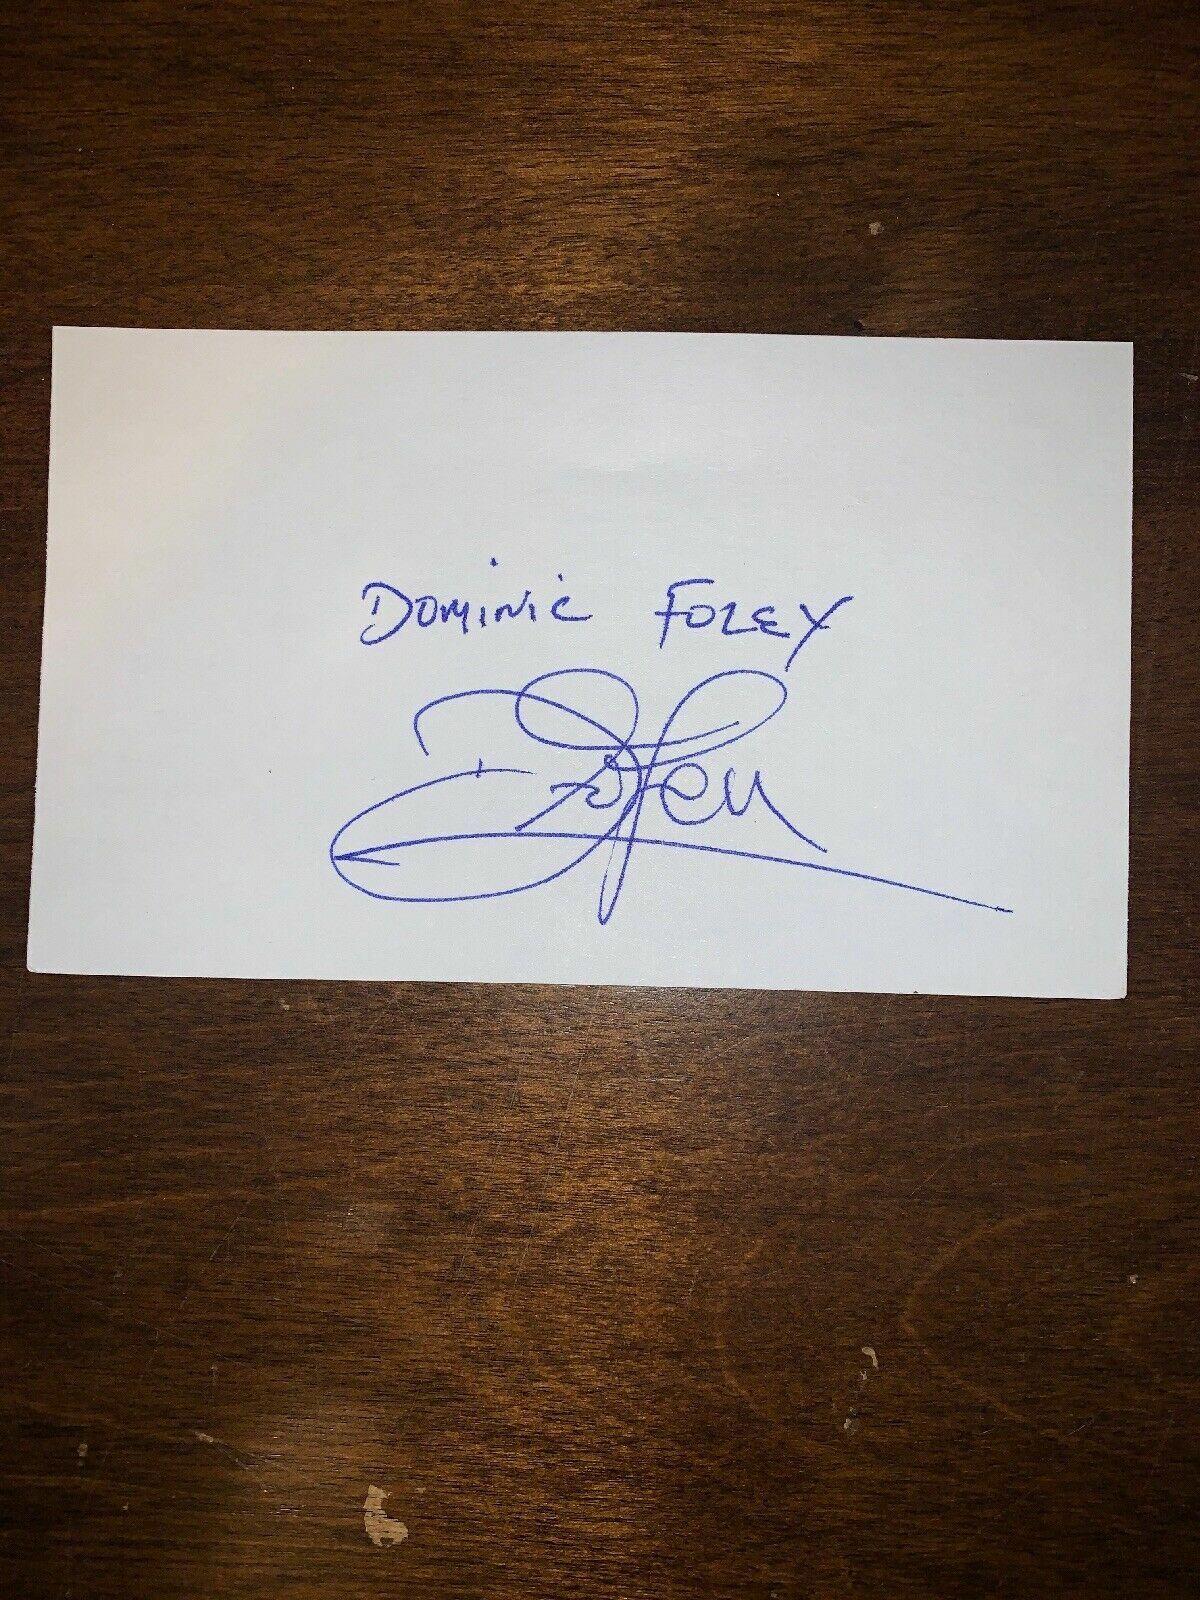 DOMINIC FOLEY - SOCCER - AUTOGRAPH SIGNED - INDEX CARD -AUTHENTIC -C1916